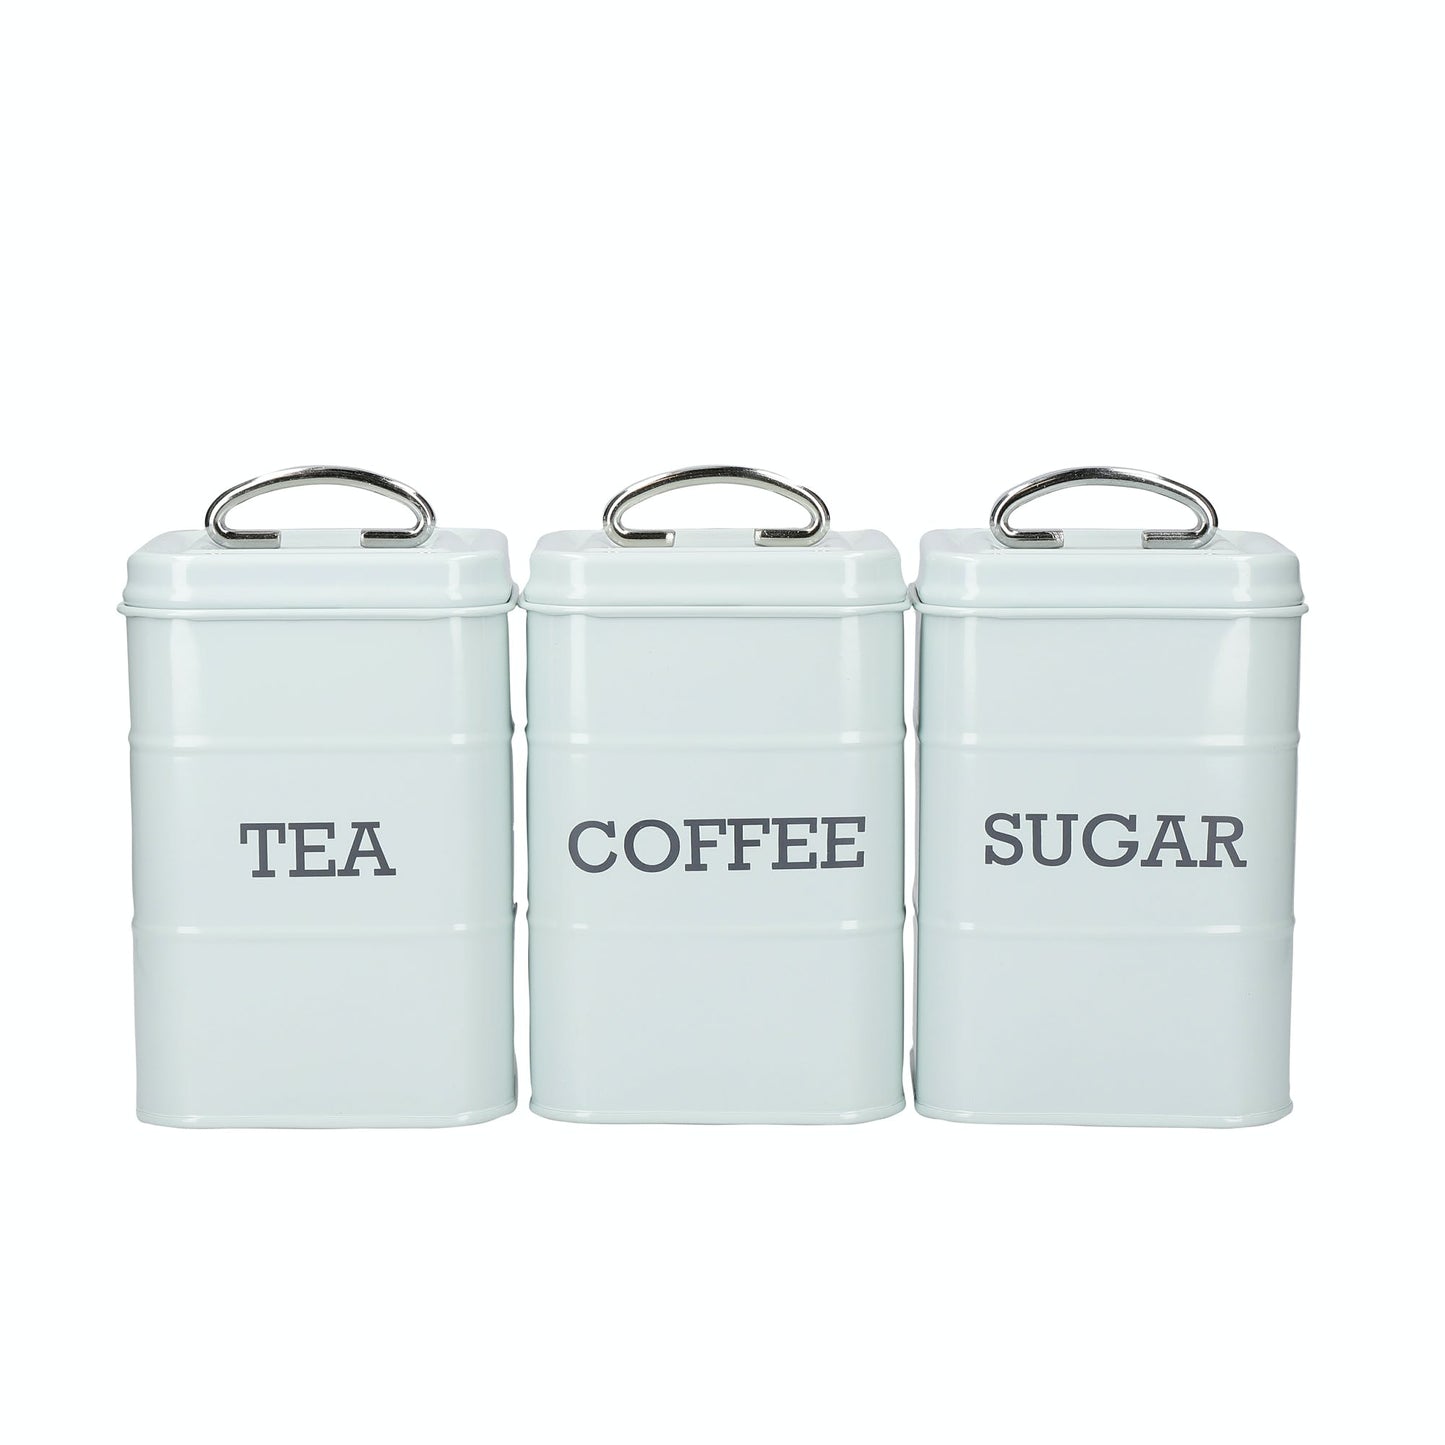 KitchenCraft Living Nostalgia Tea/Coffee/Sugar Canisters in Gift Box, Steel,